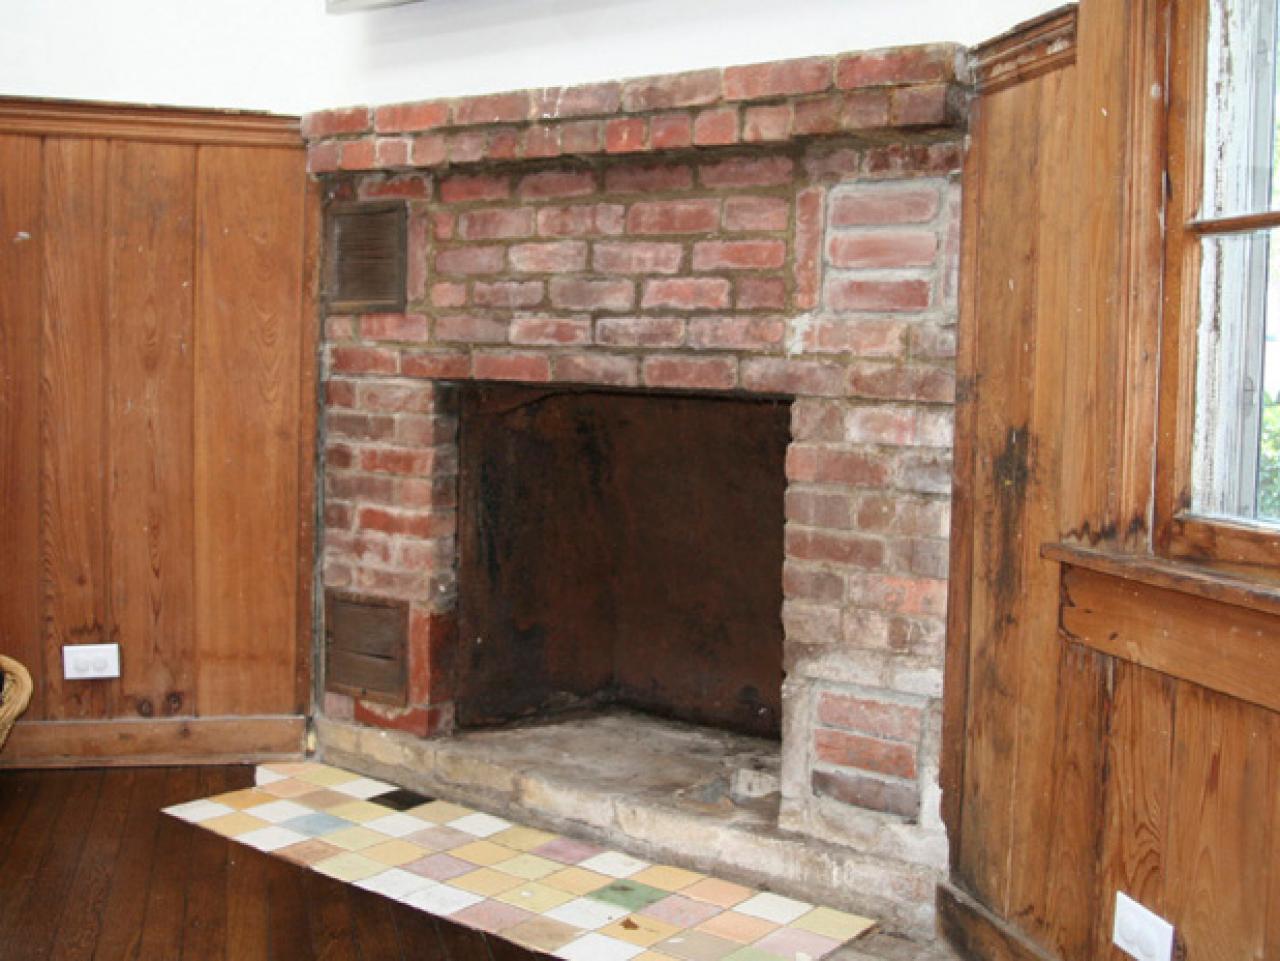 Brick Fireplace With Stone, How To Apply Stone Over Brick Fireplace